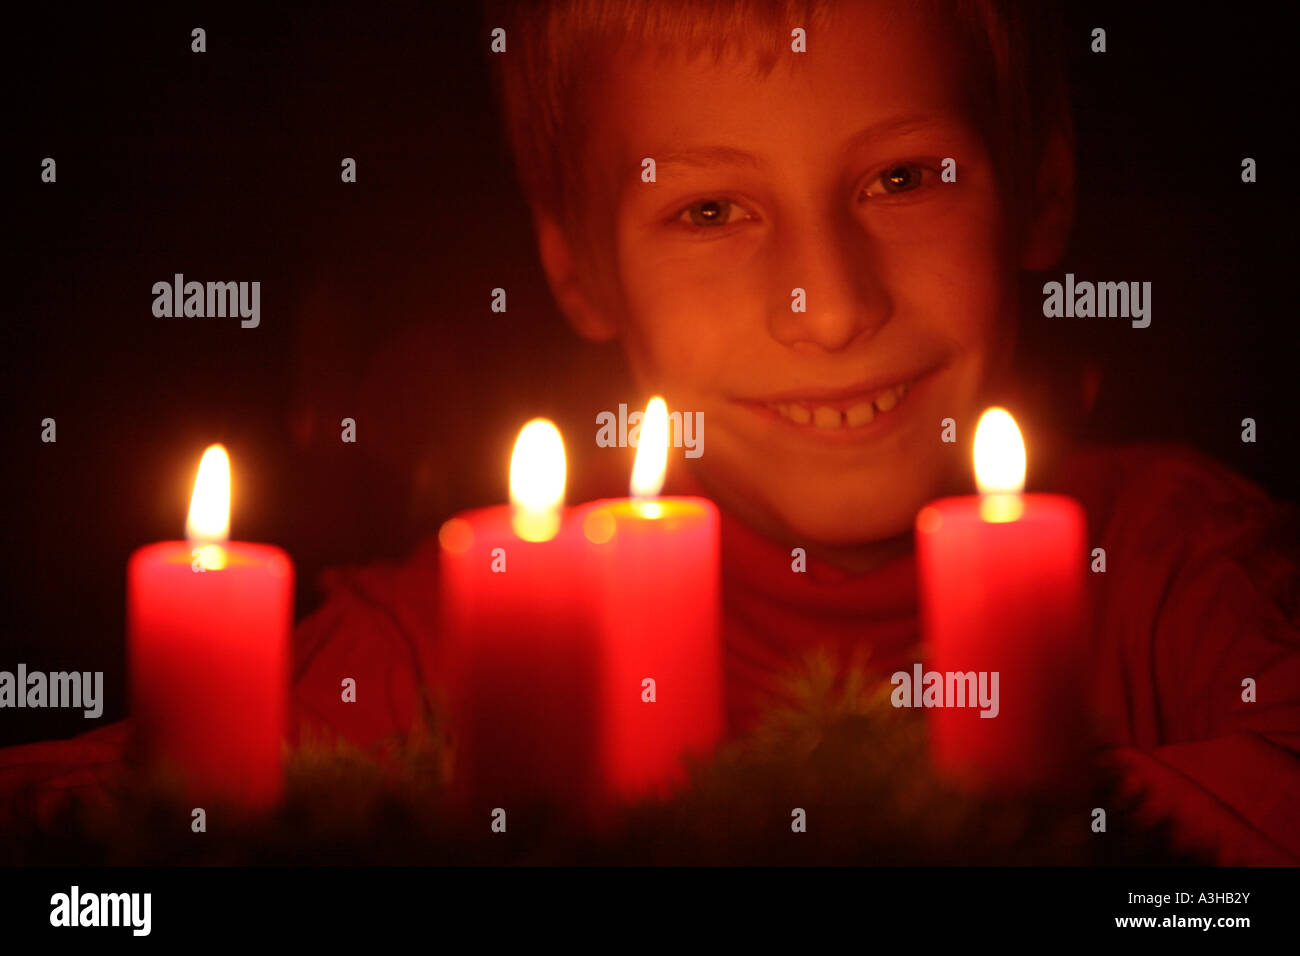 young boy looking happily at the candles of an Advent wreath Stock Photo